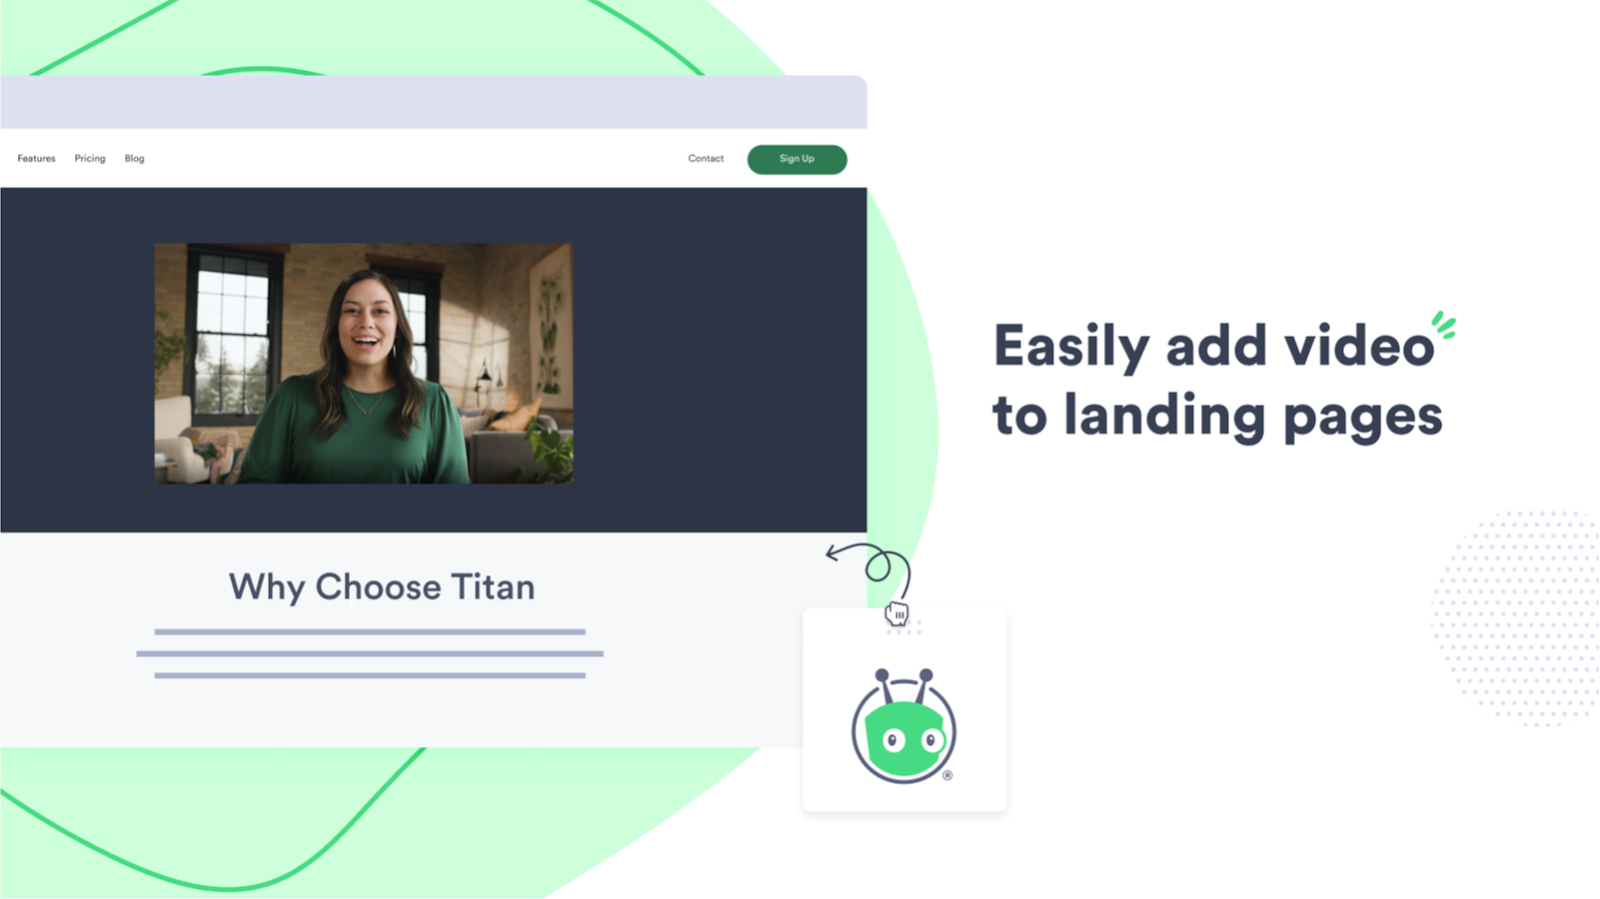 Easily add video to landing pages in HubSpot